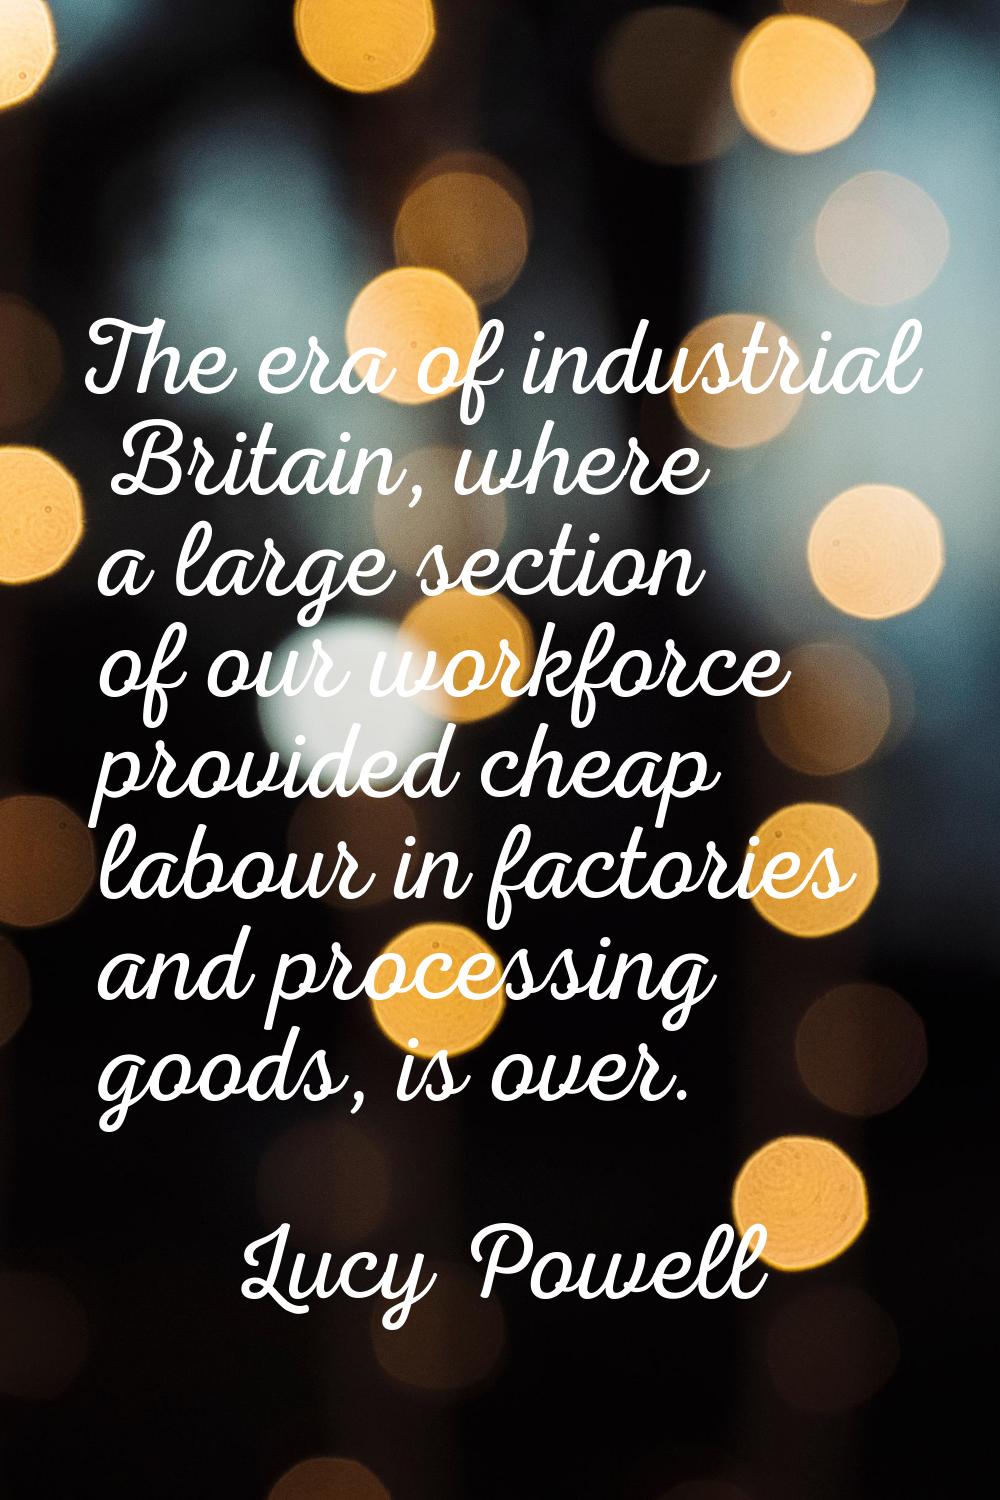 The era of industrial Britain, where a large section of our workforce provided cheap labour in fact